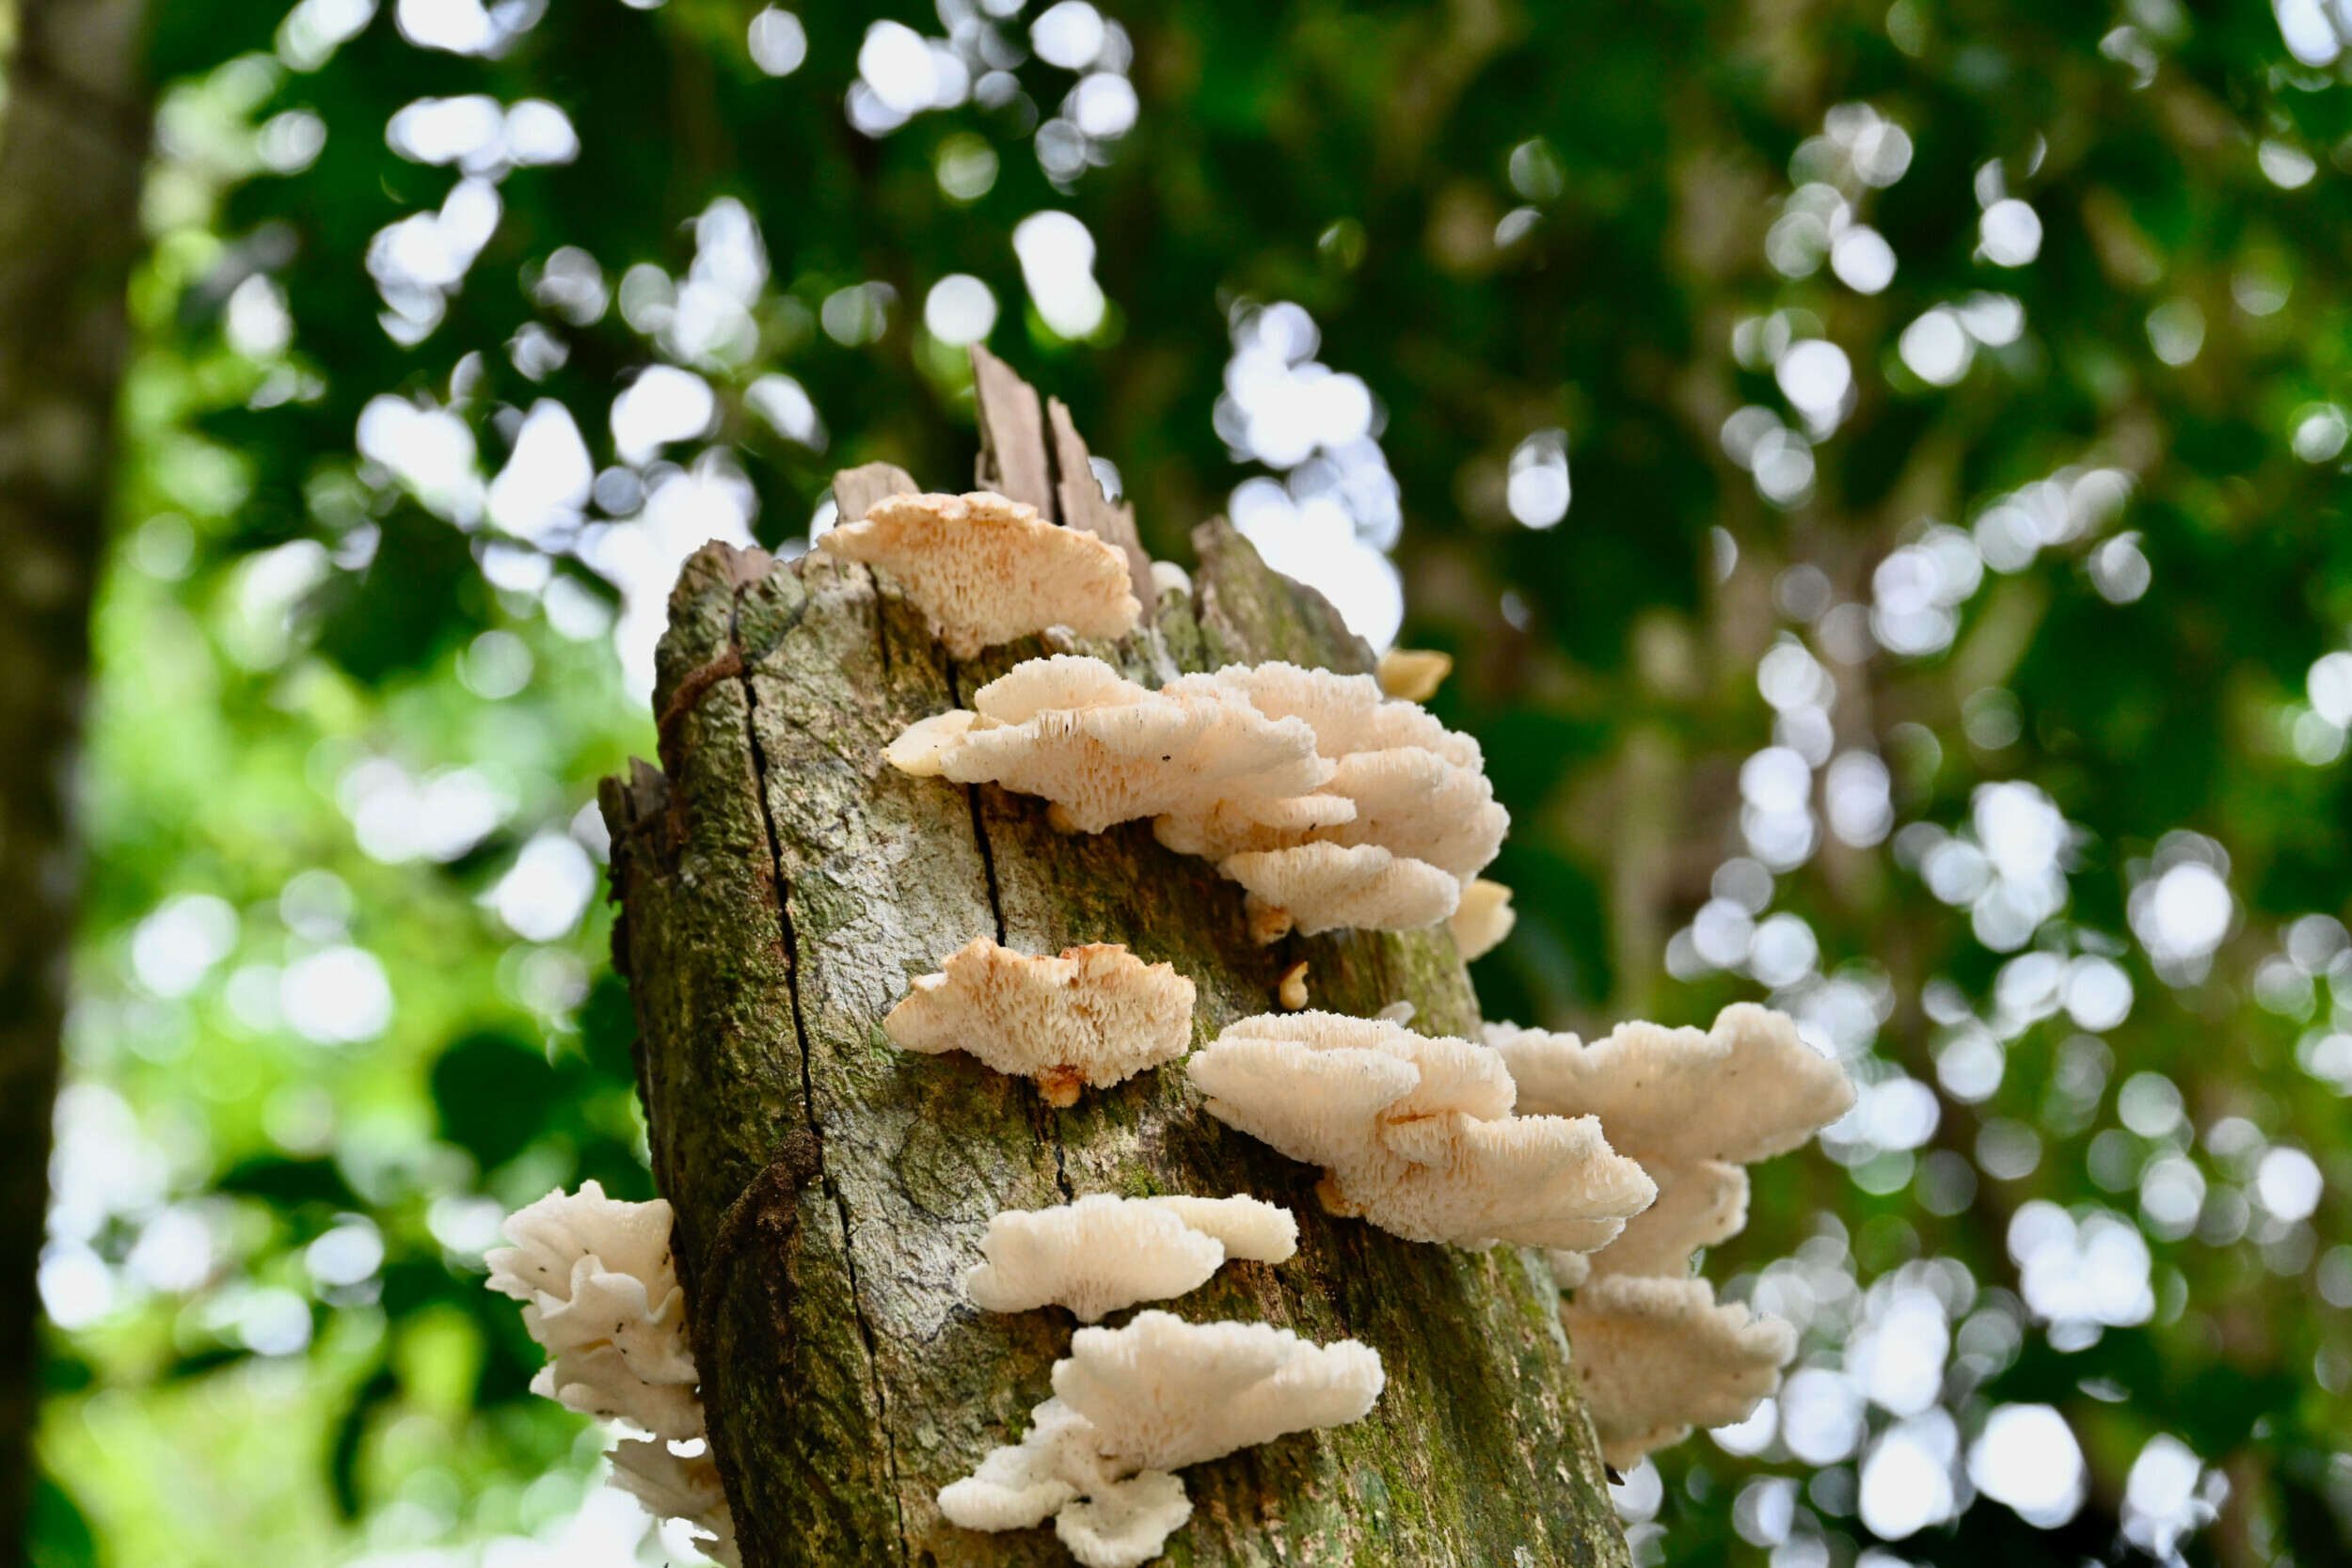 Close-up of tree fungi in Manuel Antonio National Park, Costa Rica, showcasing the delicate textures against a bokeh background.